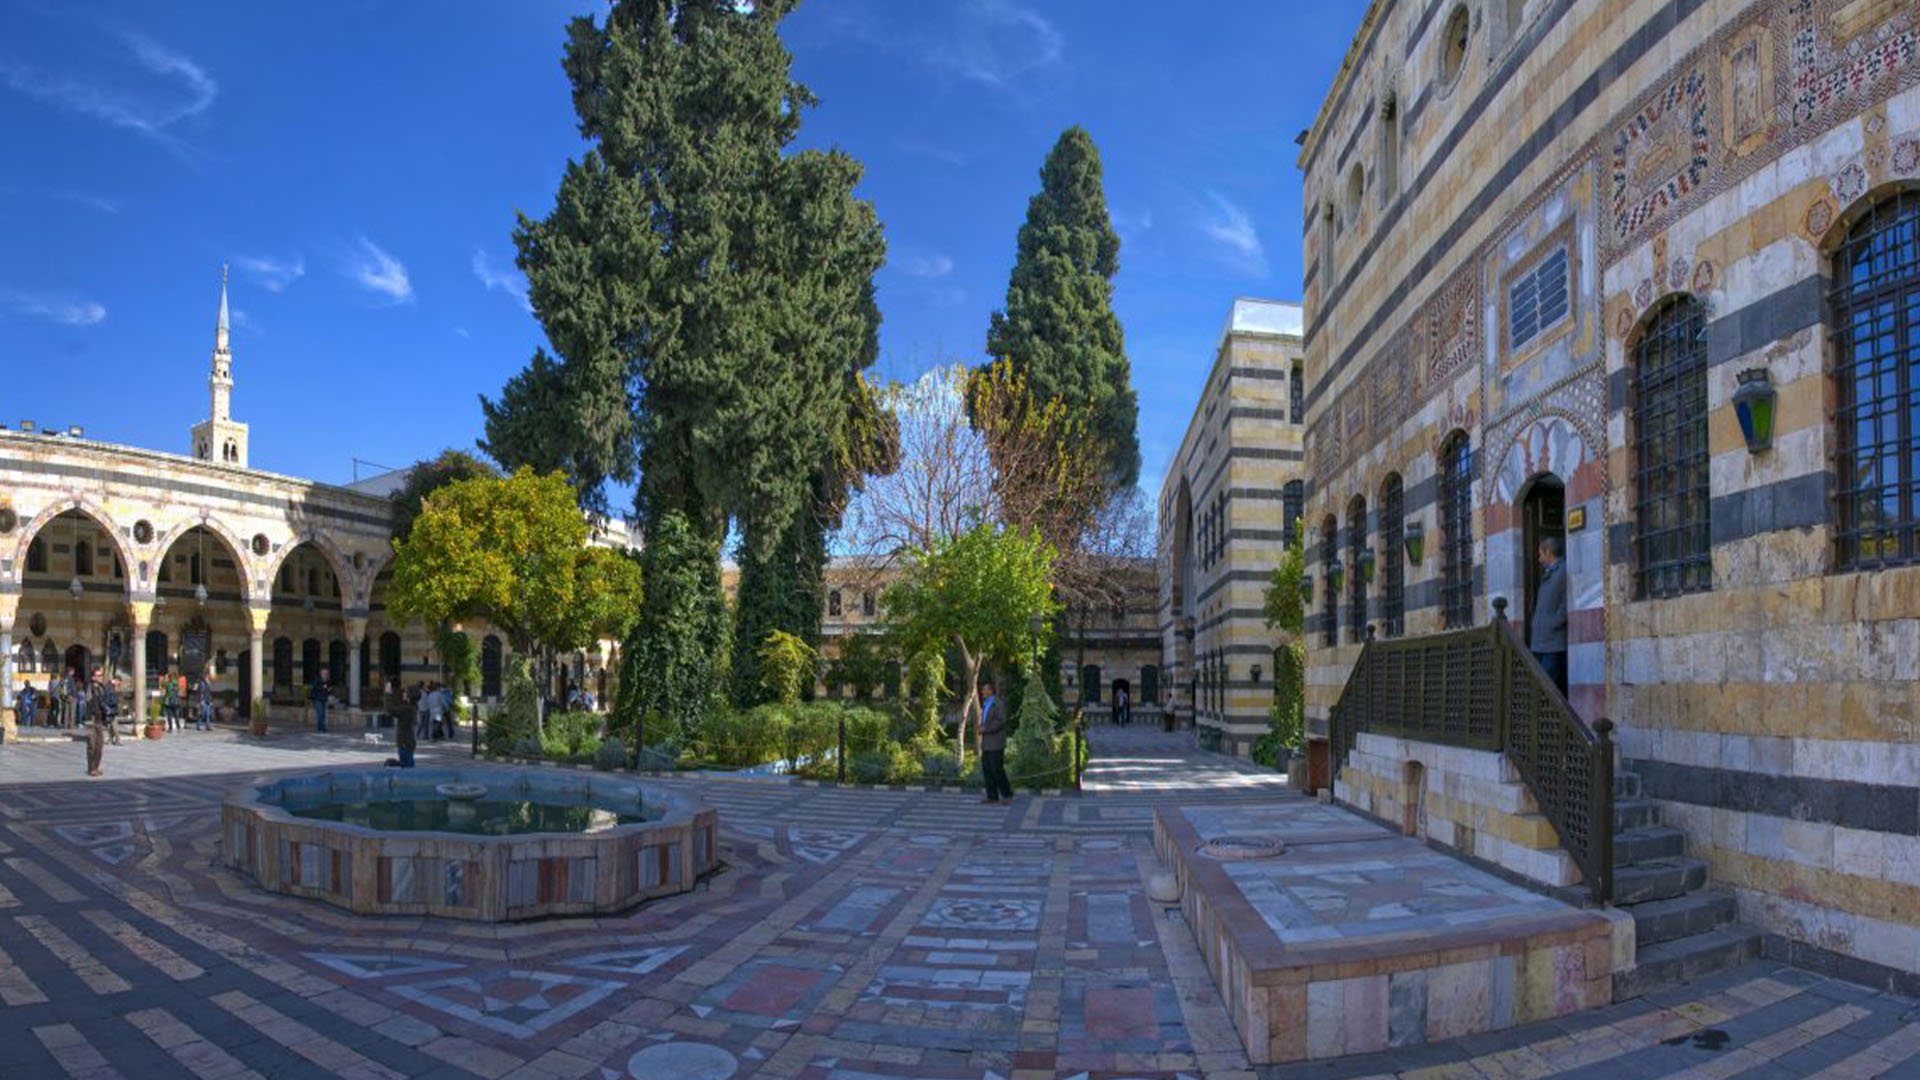 A photograph showcases the expansive courtyard of Al-Azem Palace in Damascus, adorned with towering trees in the background.